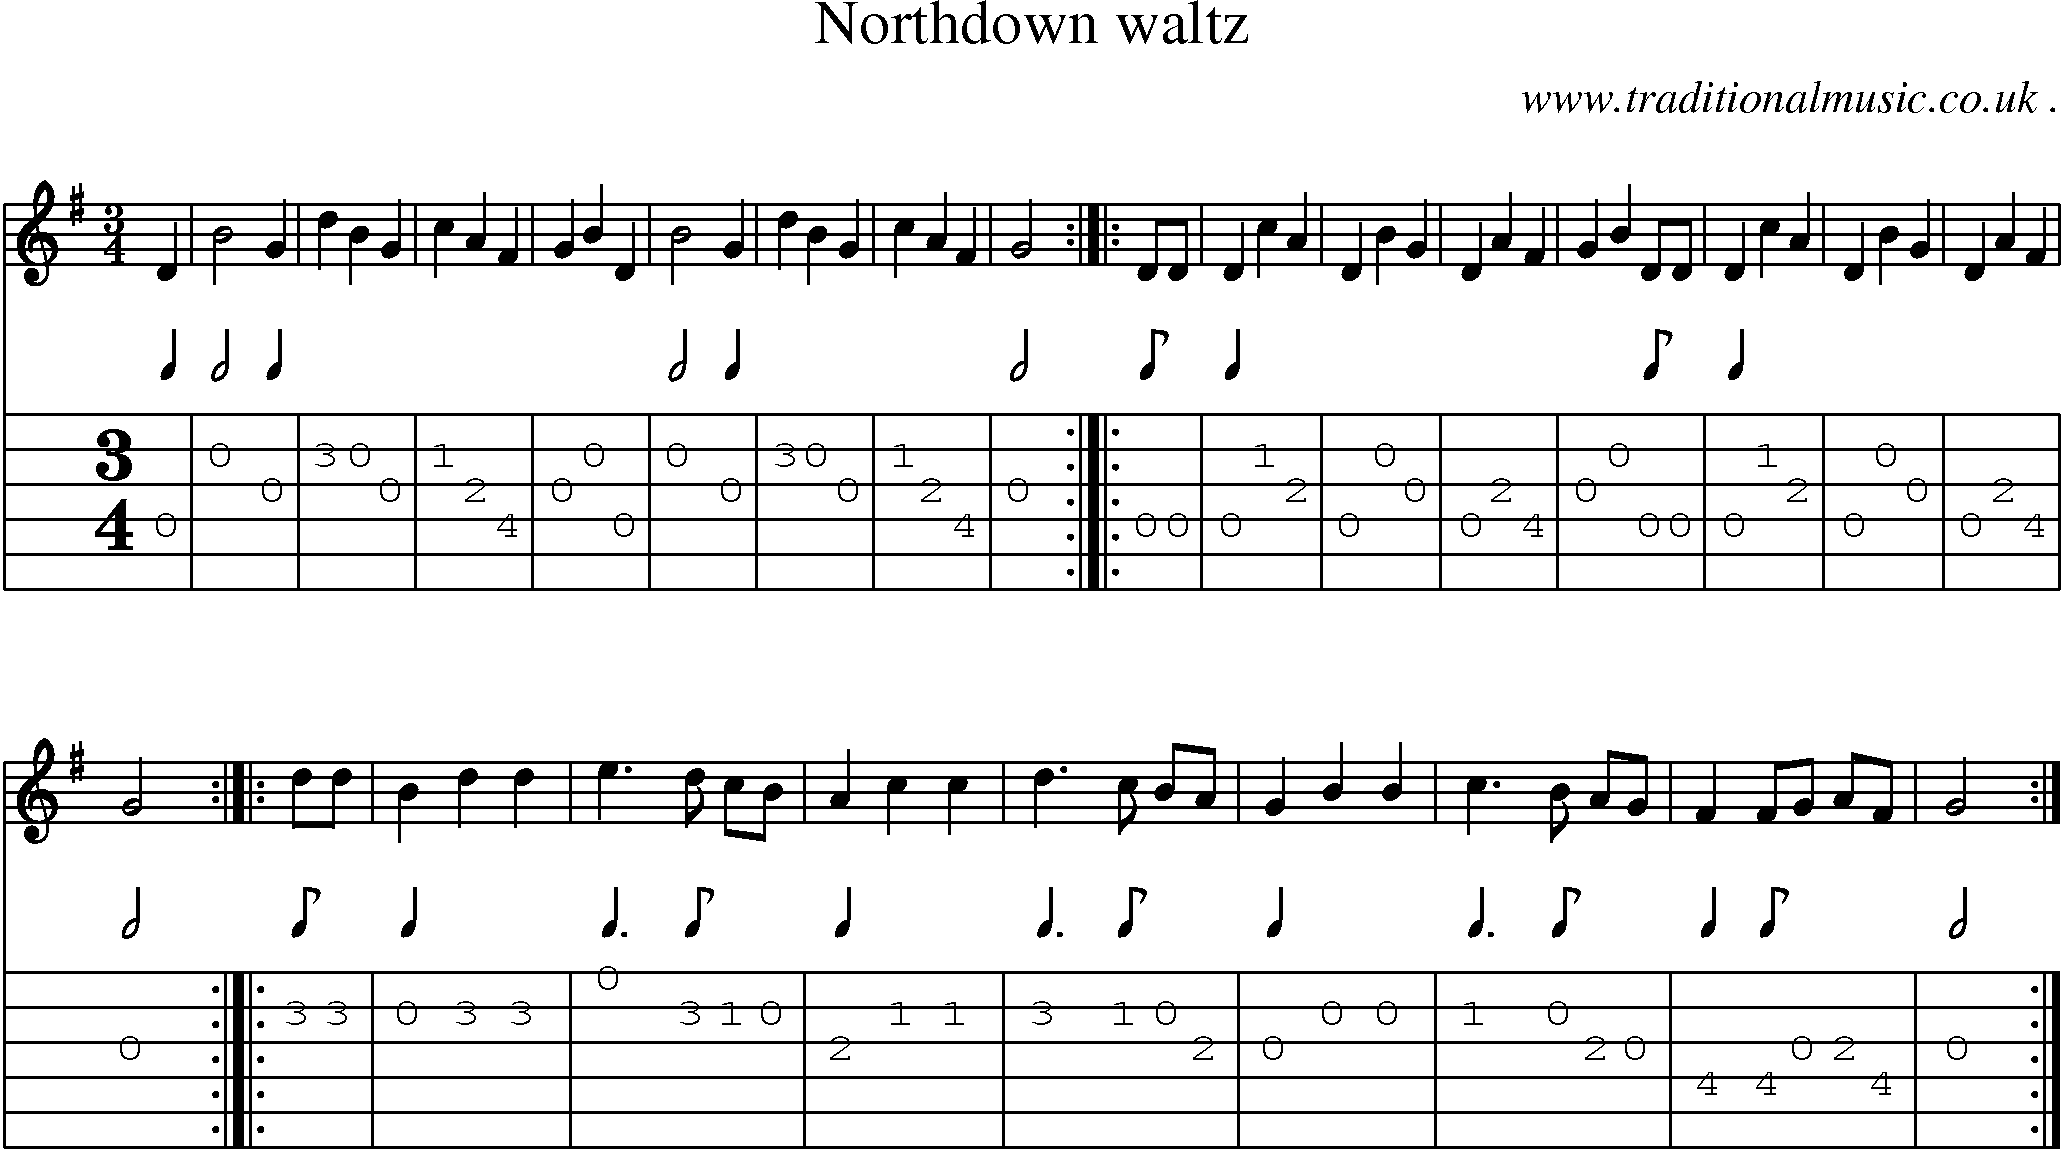 Sheet-Music and Guitar Tabs for Northdown Waltz